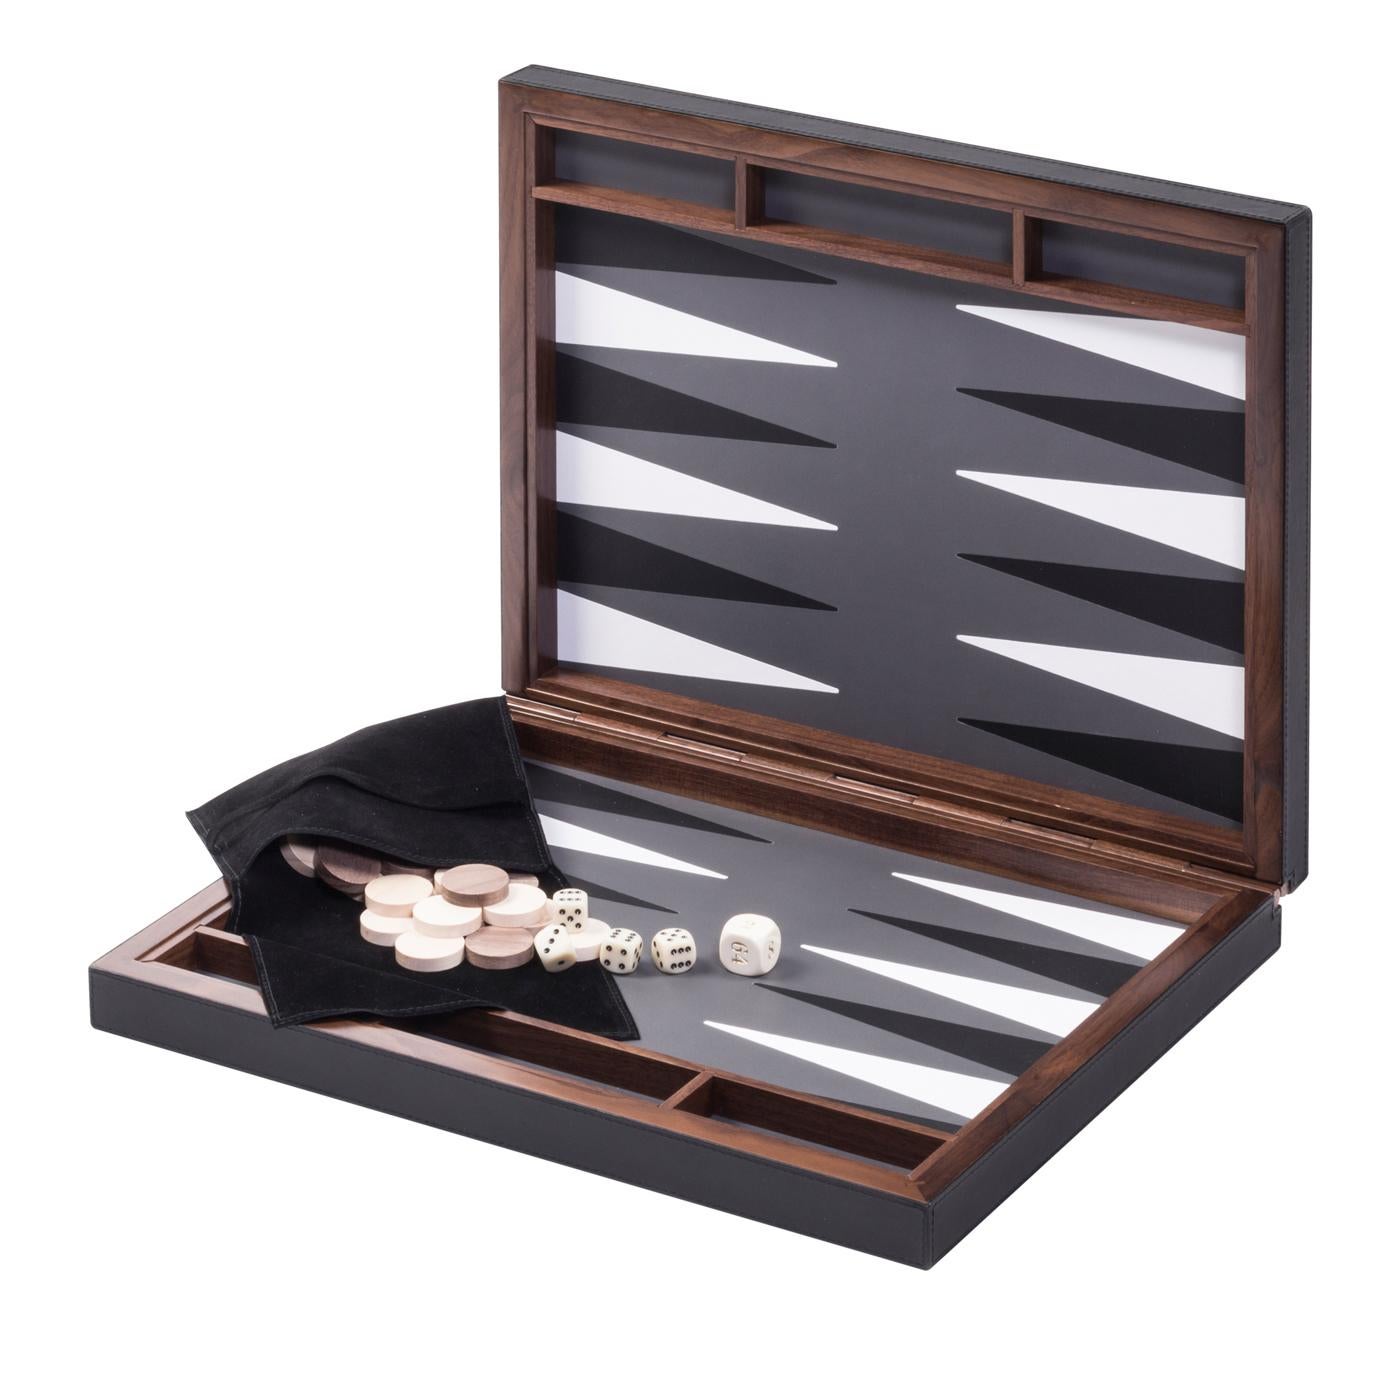 Part of the Tosca collection, this elegant backgammon board and case is part of a limited series and will be a striking addition to a personal collection, or a superb gift for a game lover. Its structure in walnut features three open compartments at